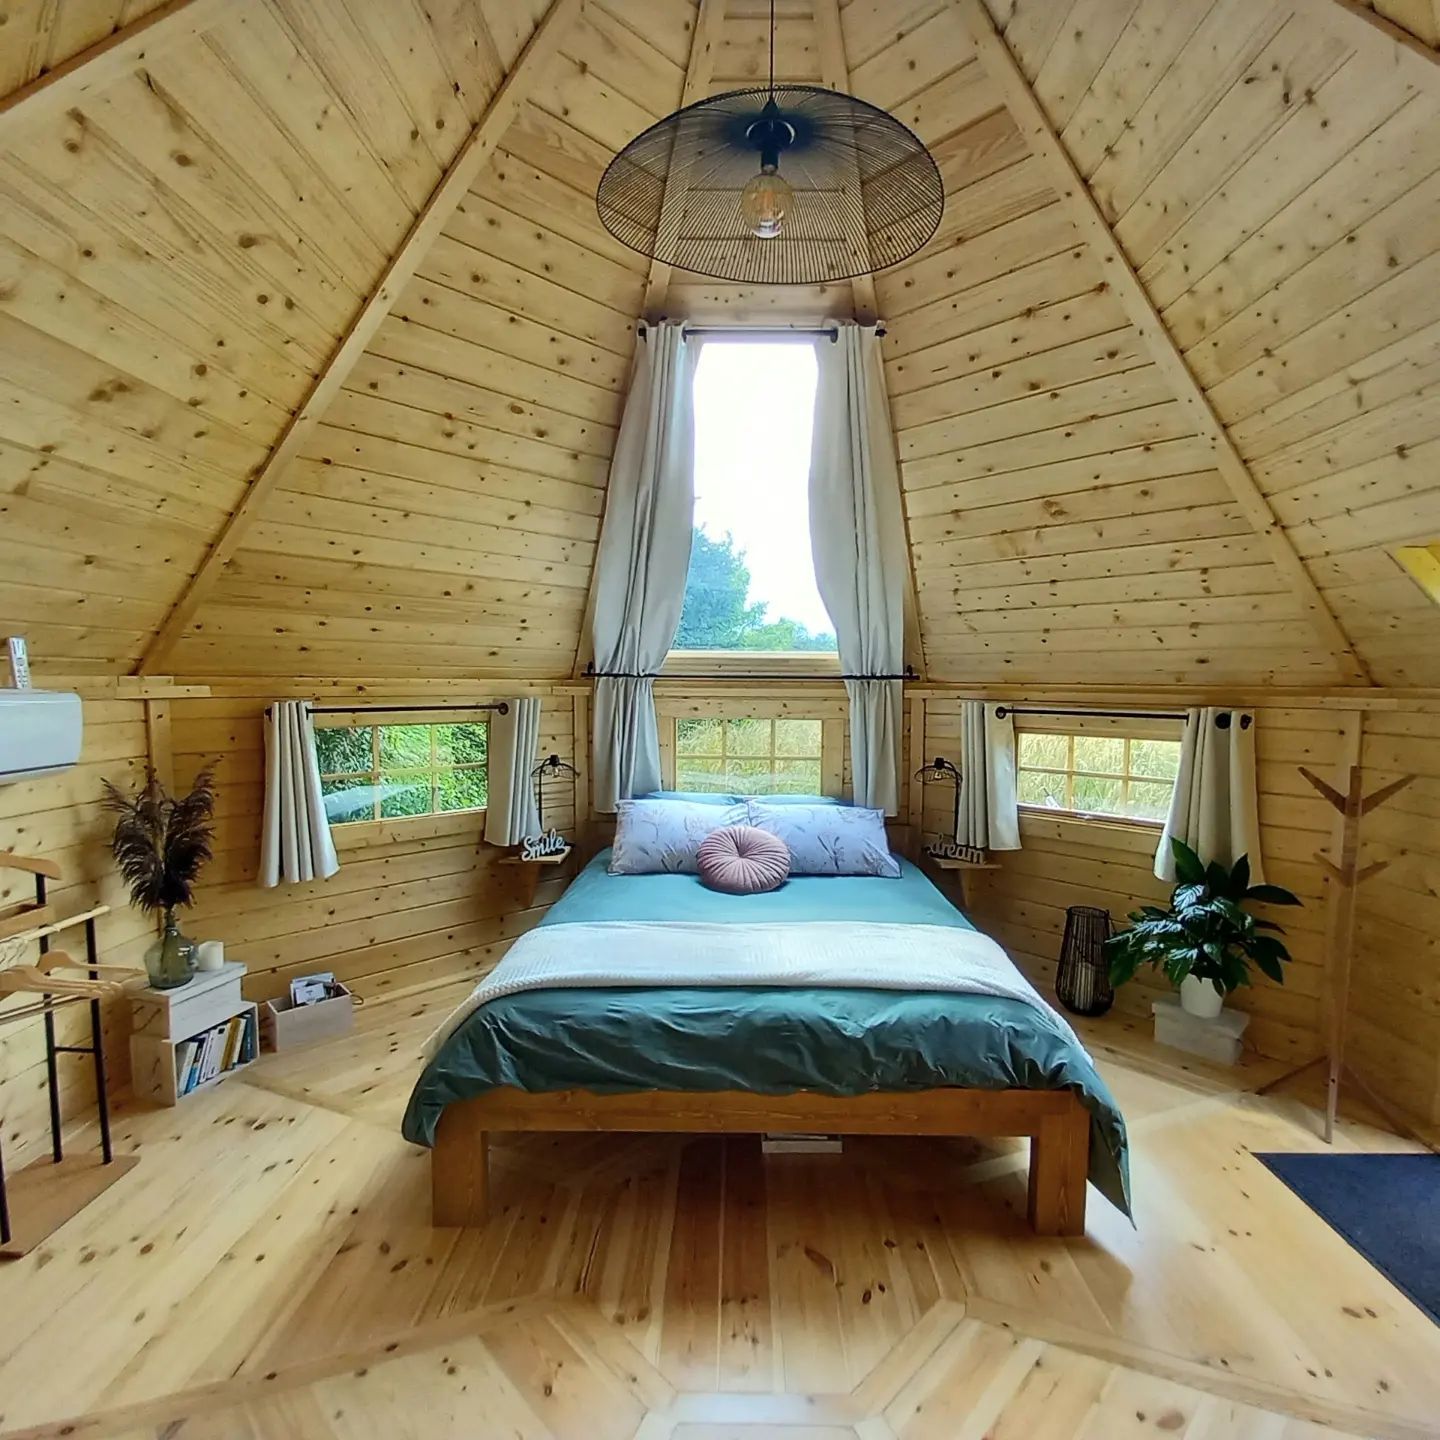 Glamping pods by Cabins Unlimited